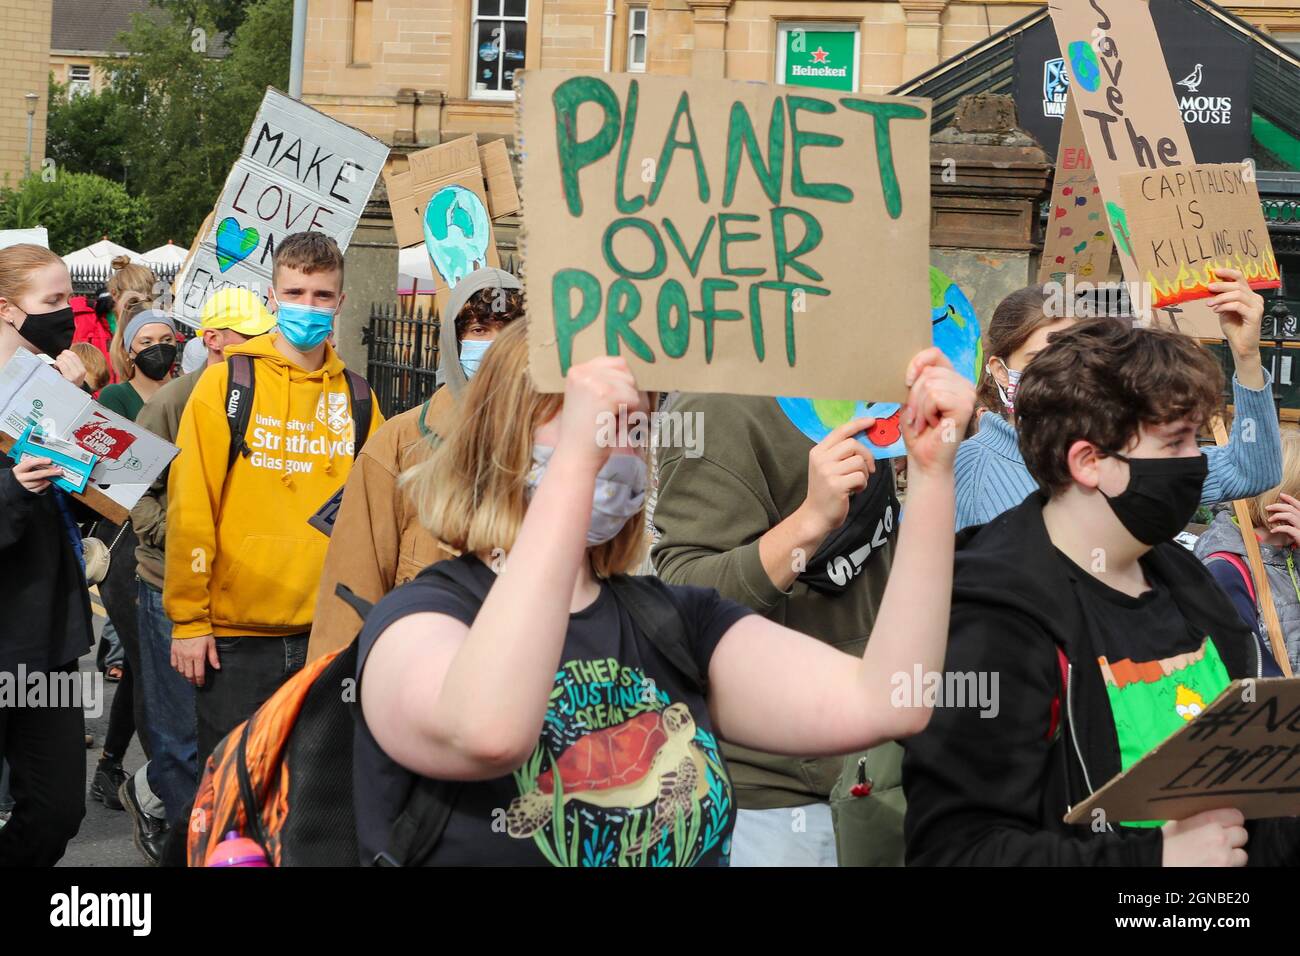 Glasgow, UK. 24th Sep, 2021. "FRIDAYS FOR FUTURE SCOTLAND", a multi campaign organisation highlighting climate change, pollution, socio-economic and political issues held a protest march through Glasgow city centre from Glasgow University to George Square to highlight their concerns for the environment. Credit: Findlay/Alamy Live News Stock Photo